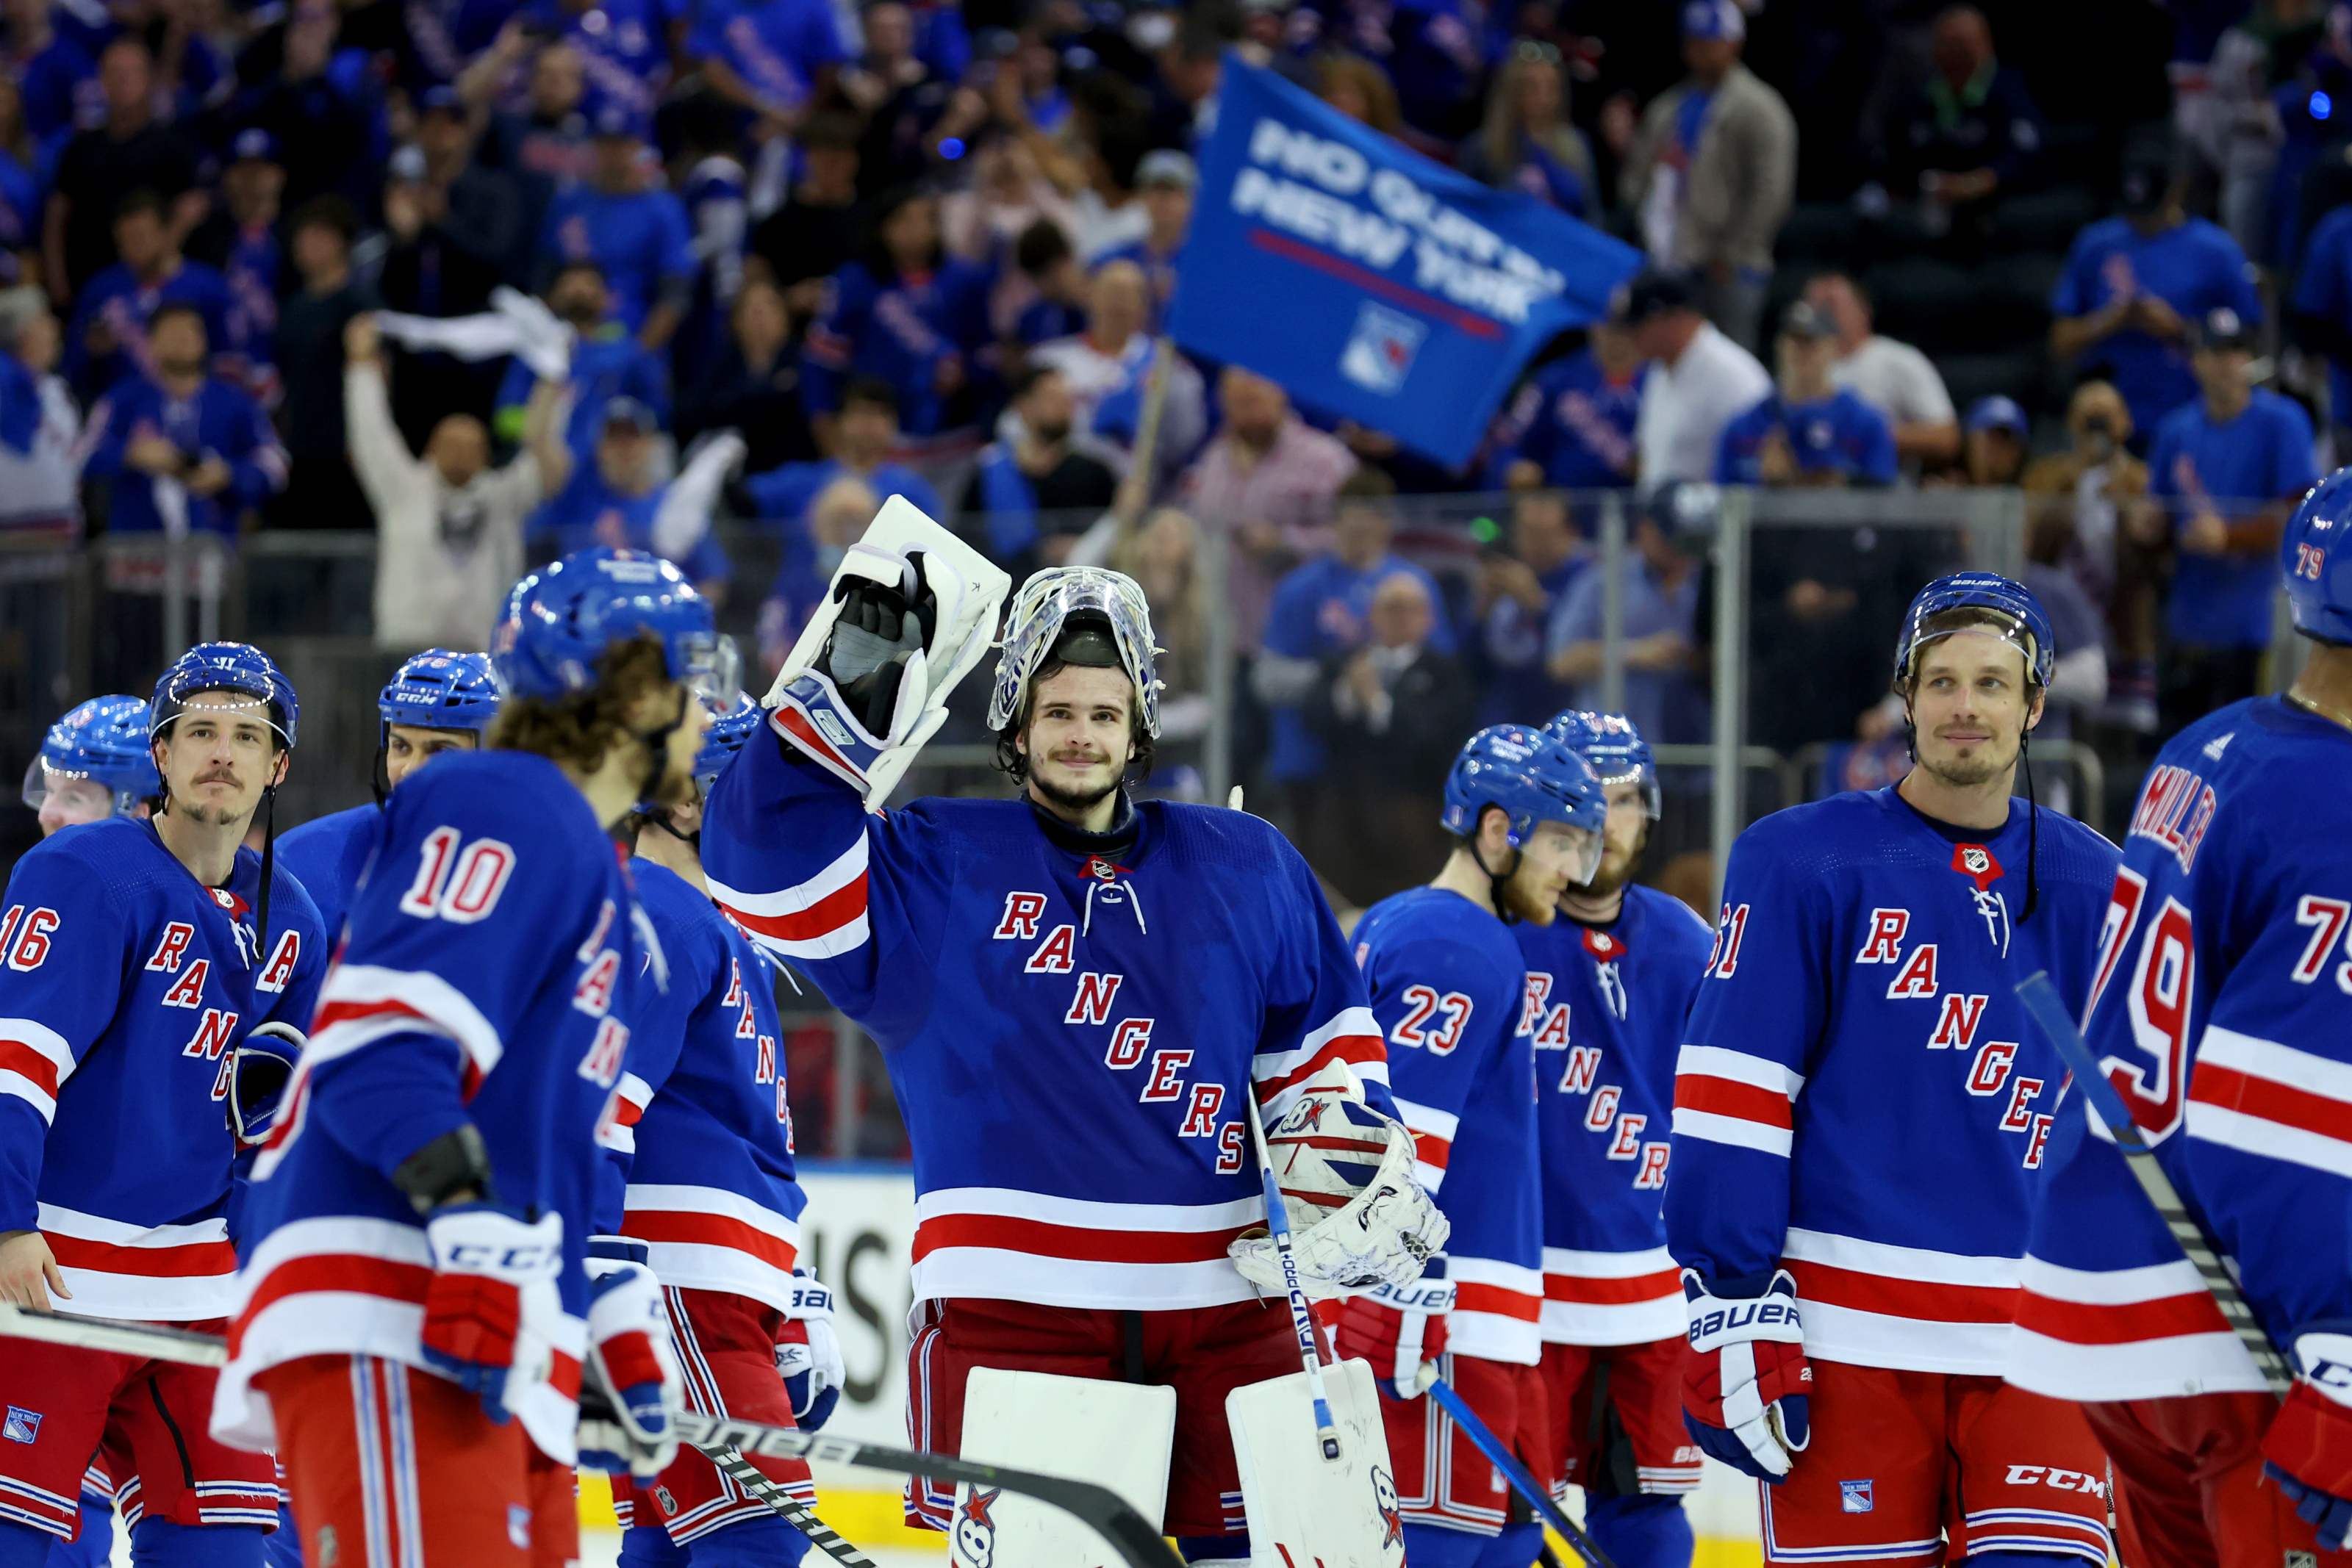 New York Rangers live to play again with 5-2 Game 6 win